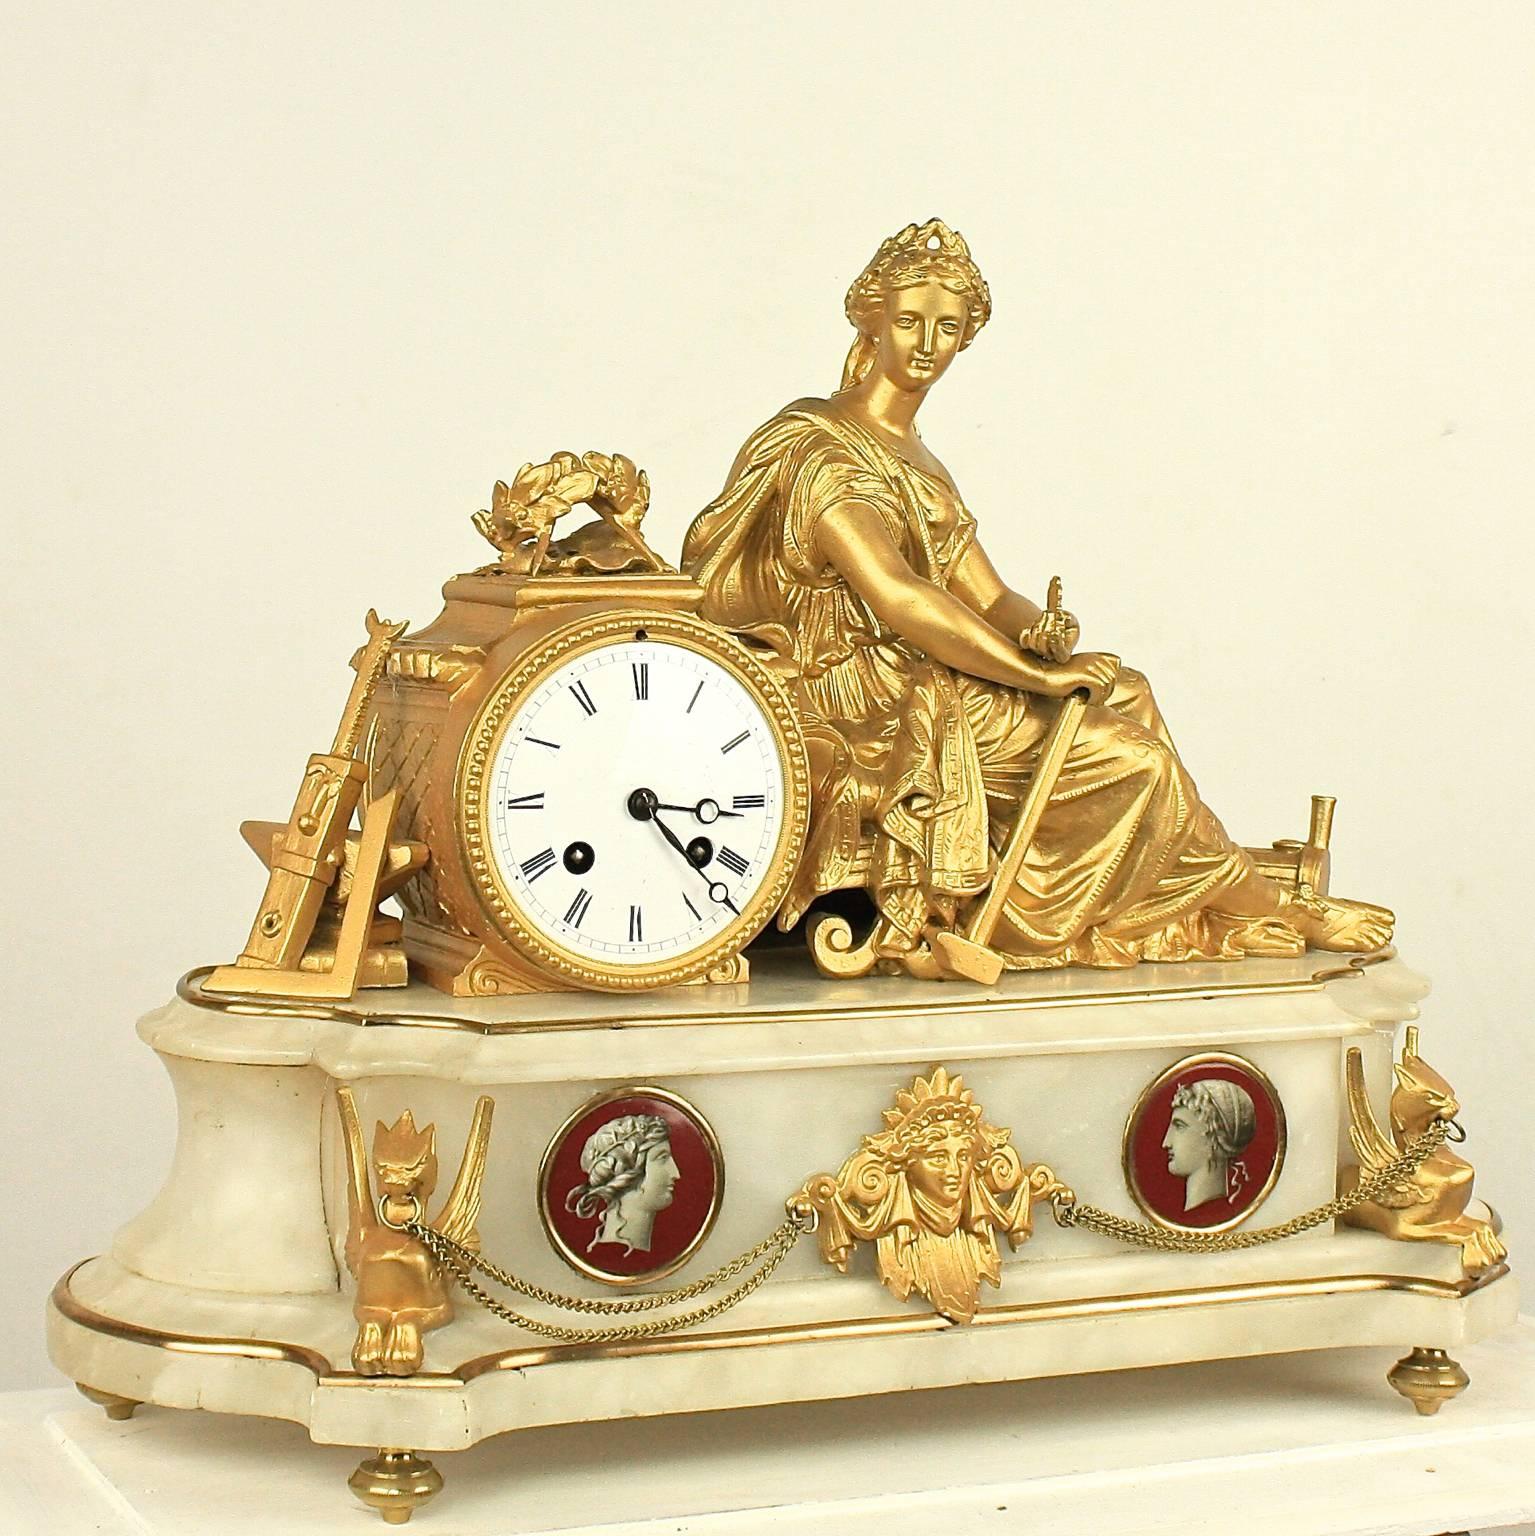 A French 19th century alabaster mantel clock, the white enamel dial with Roman numerals within a bronzed metal case, flanked by a female figure wearing the laurel leaf crown of victor and holding a Hammer, the whole being an allegory of manufacture